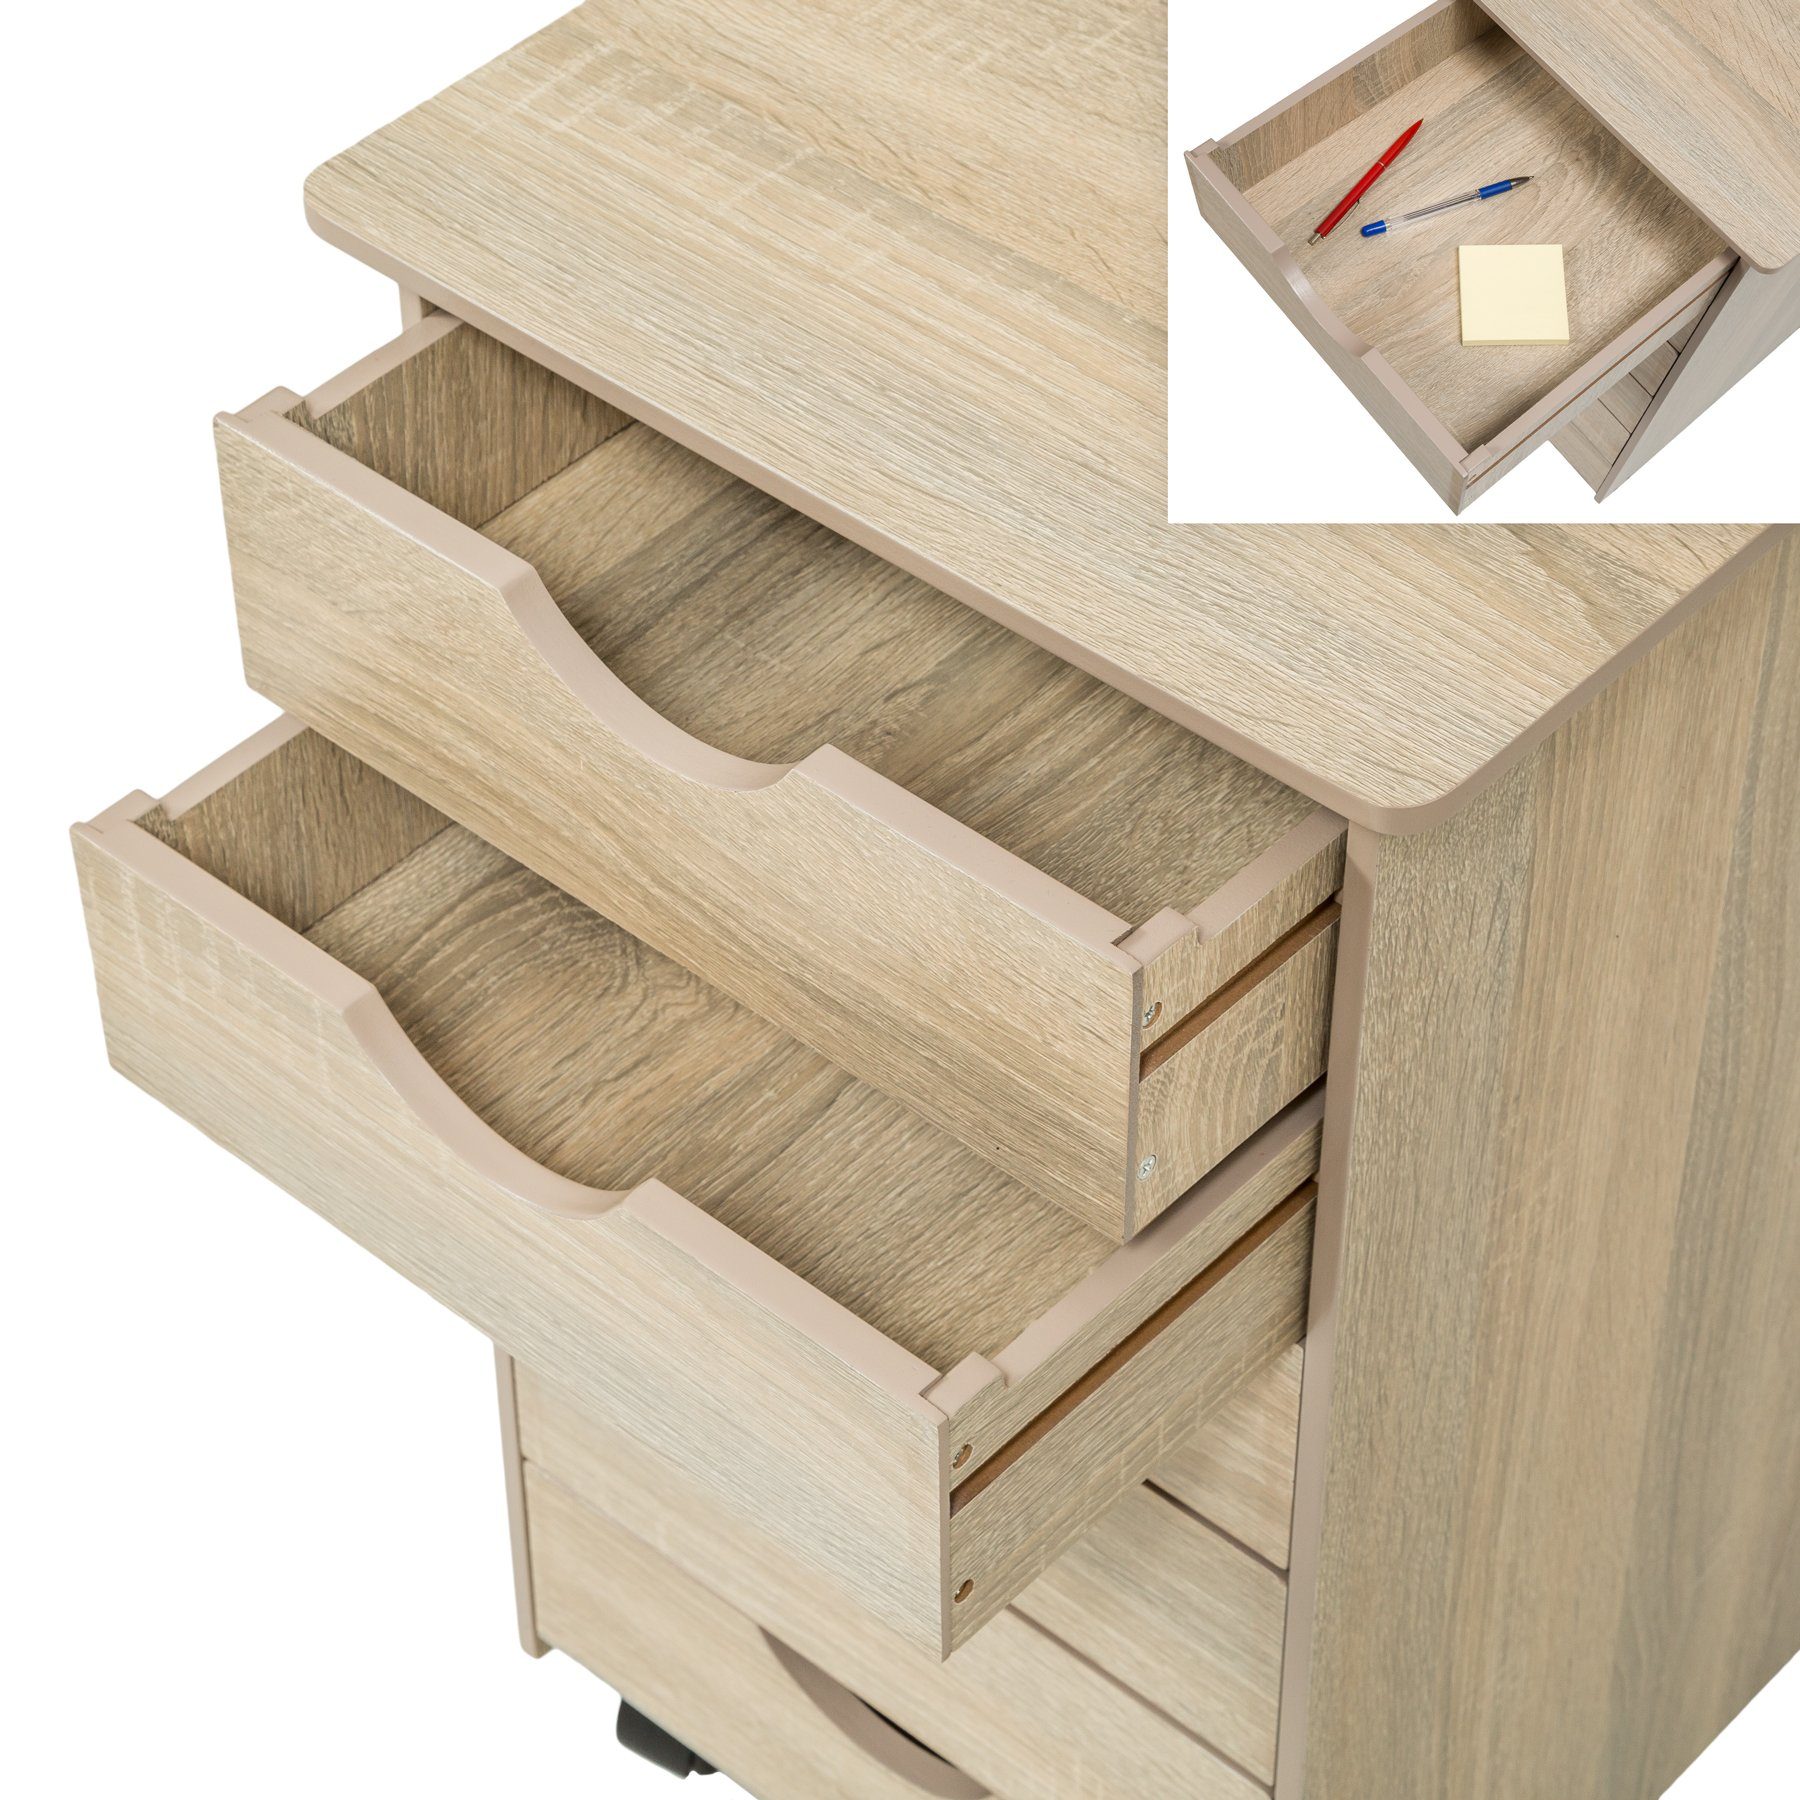 Sonoma Eiche aus Holz 65x36x40cm Holz Rollcontainer Rollcontainer hell, tectake